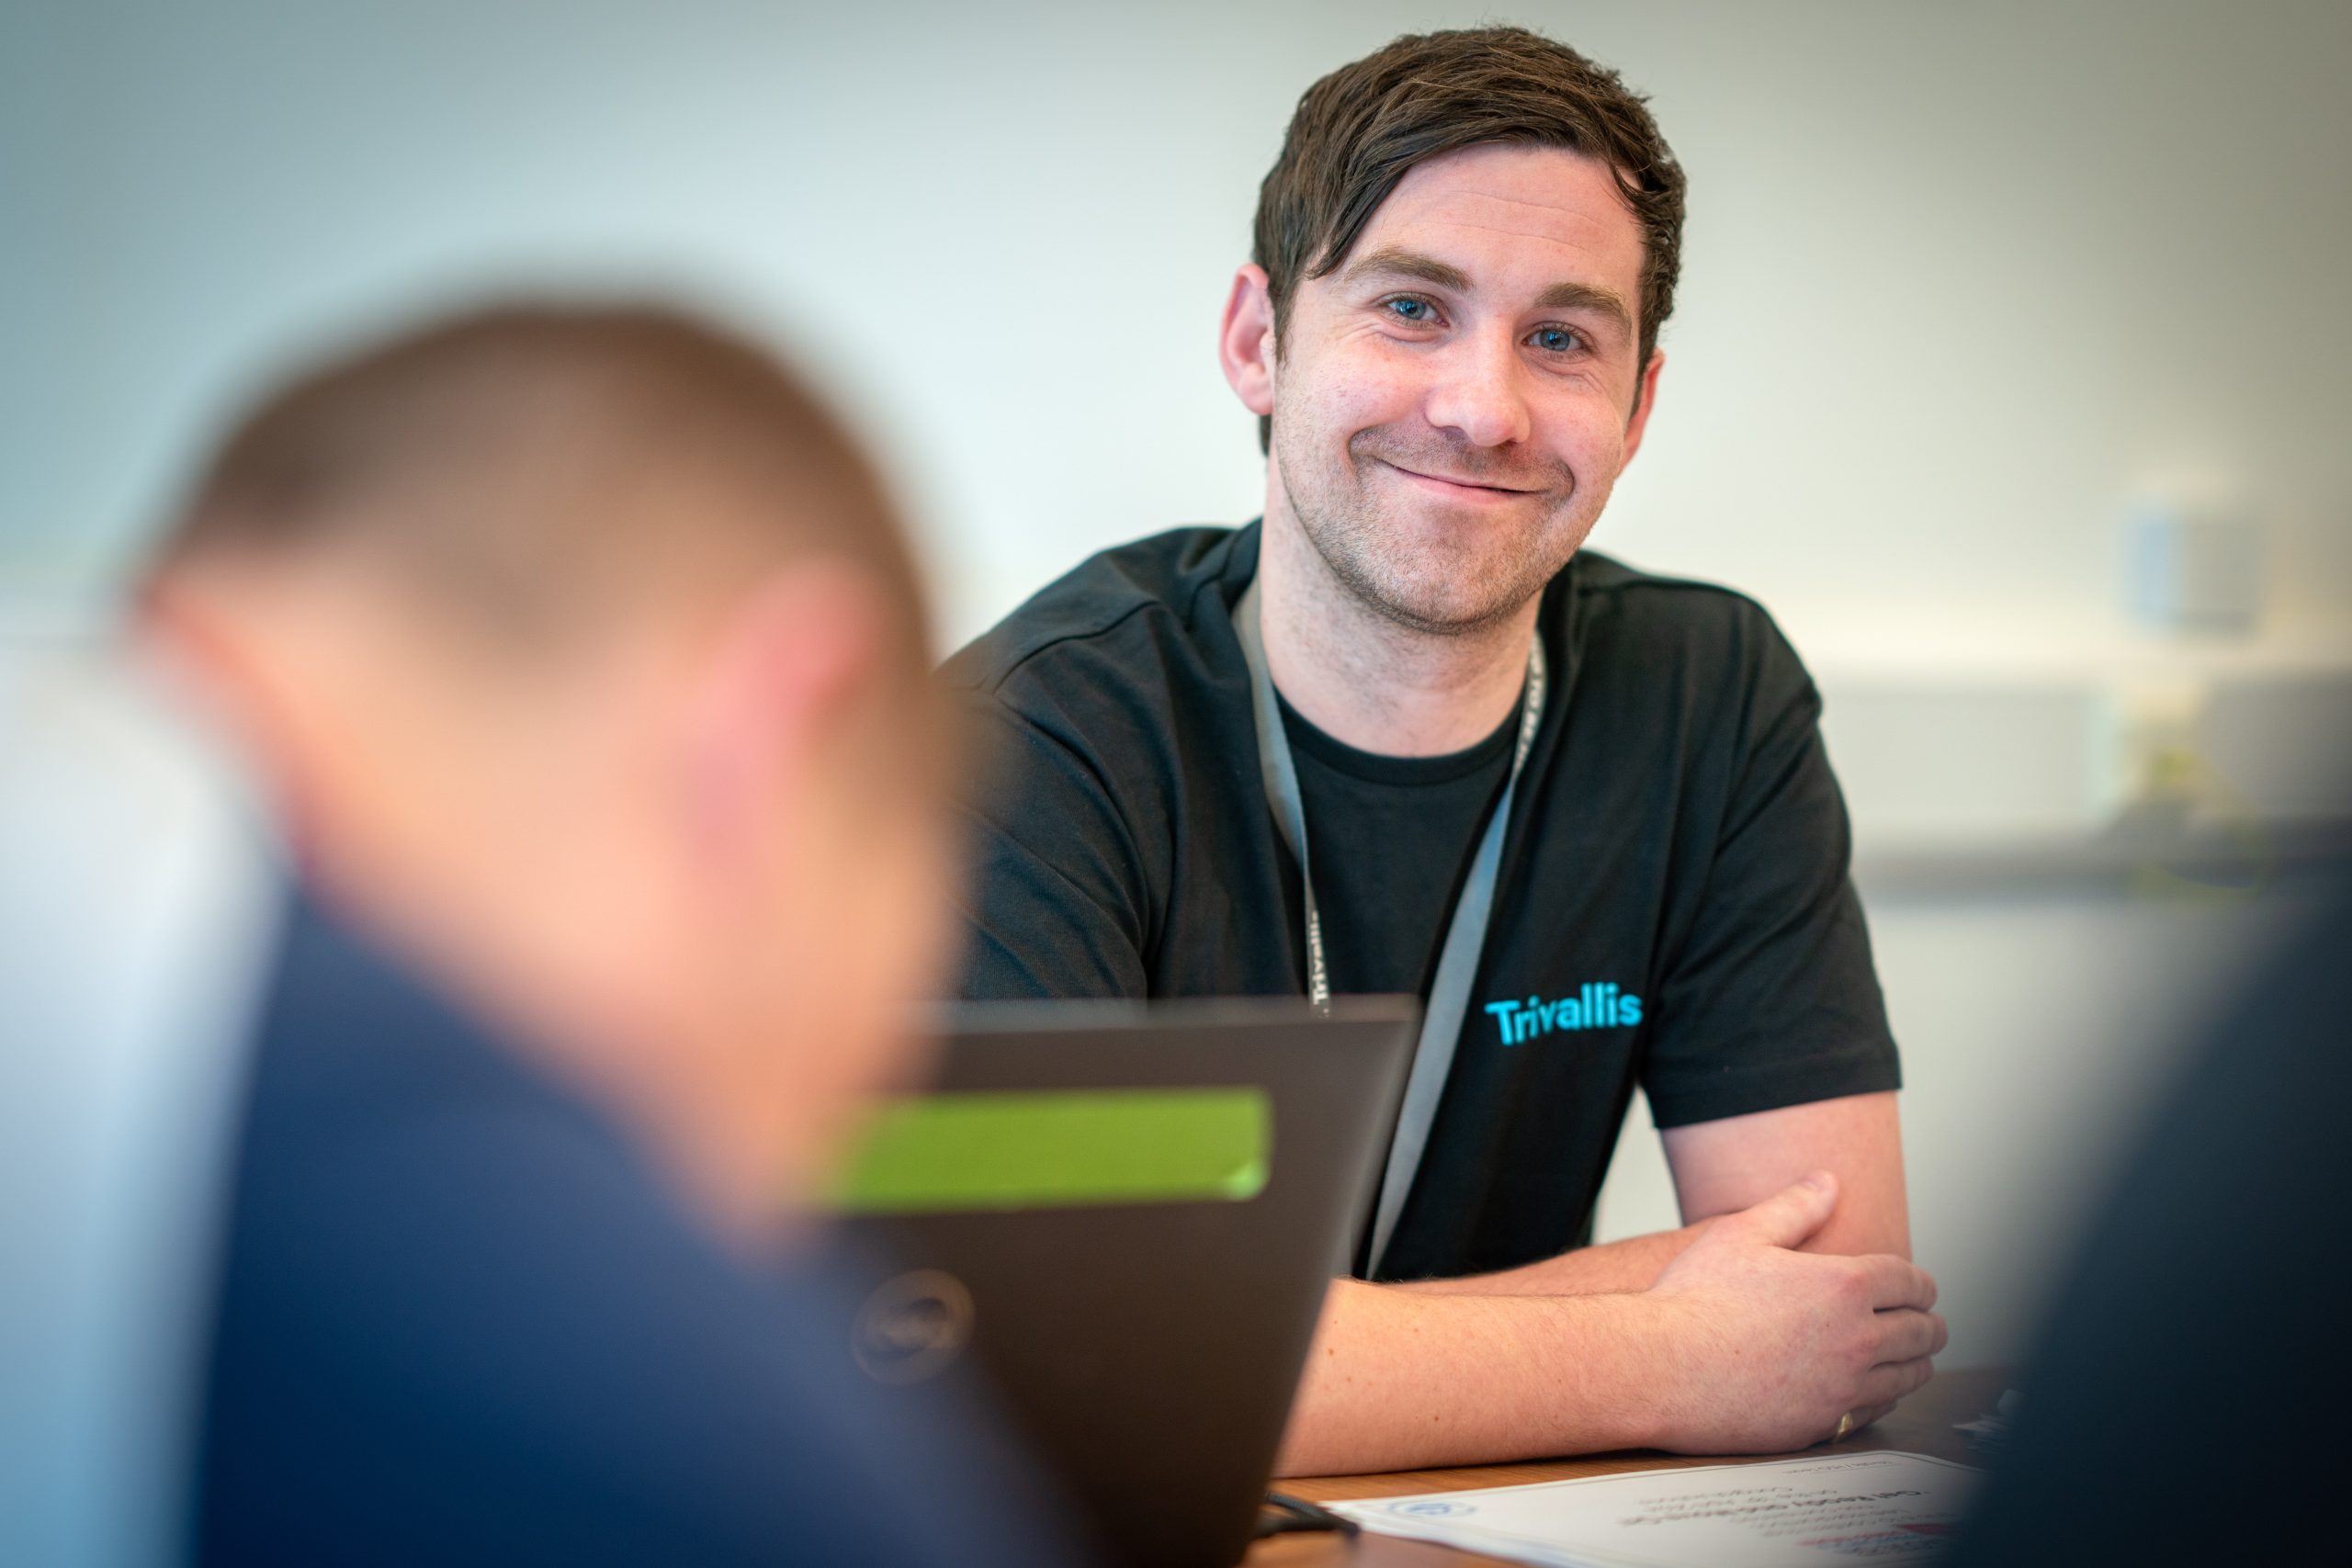 Trivallis Housing Landlord Wales A smiling man wearing a black t-shirt with the logo "trivallis" sits at a desk in an office, looking at the camera. a blurred colleague is visible in the foreground, facing a computer screen.